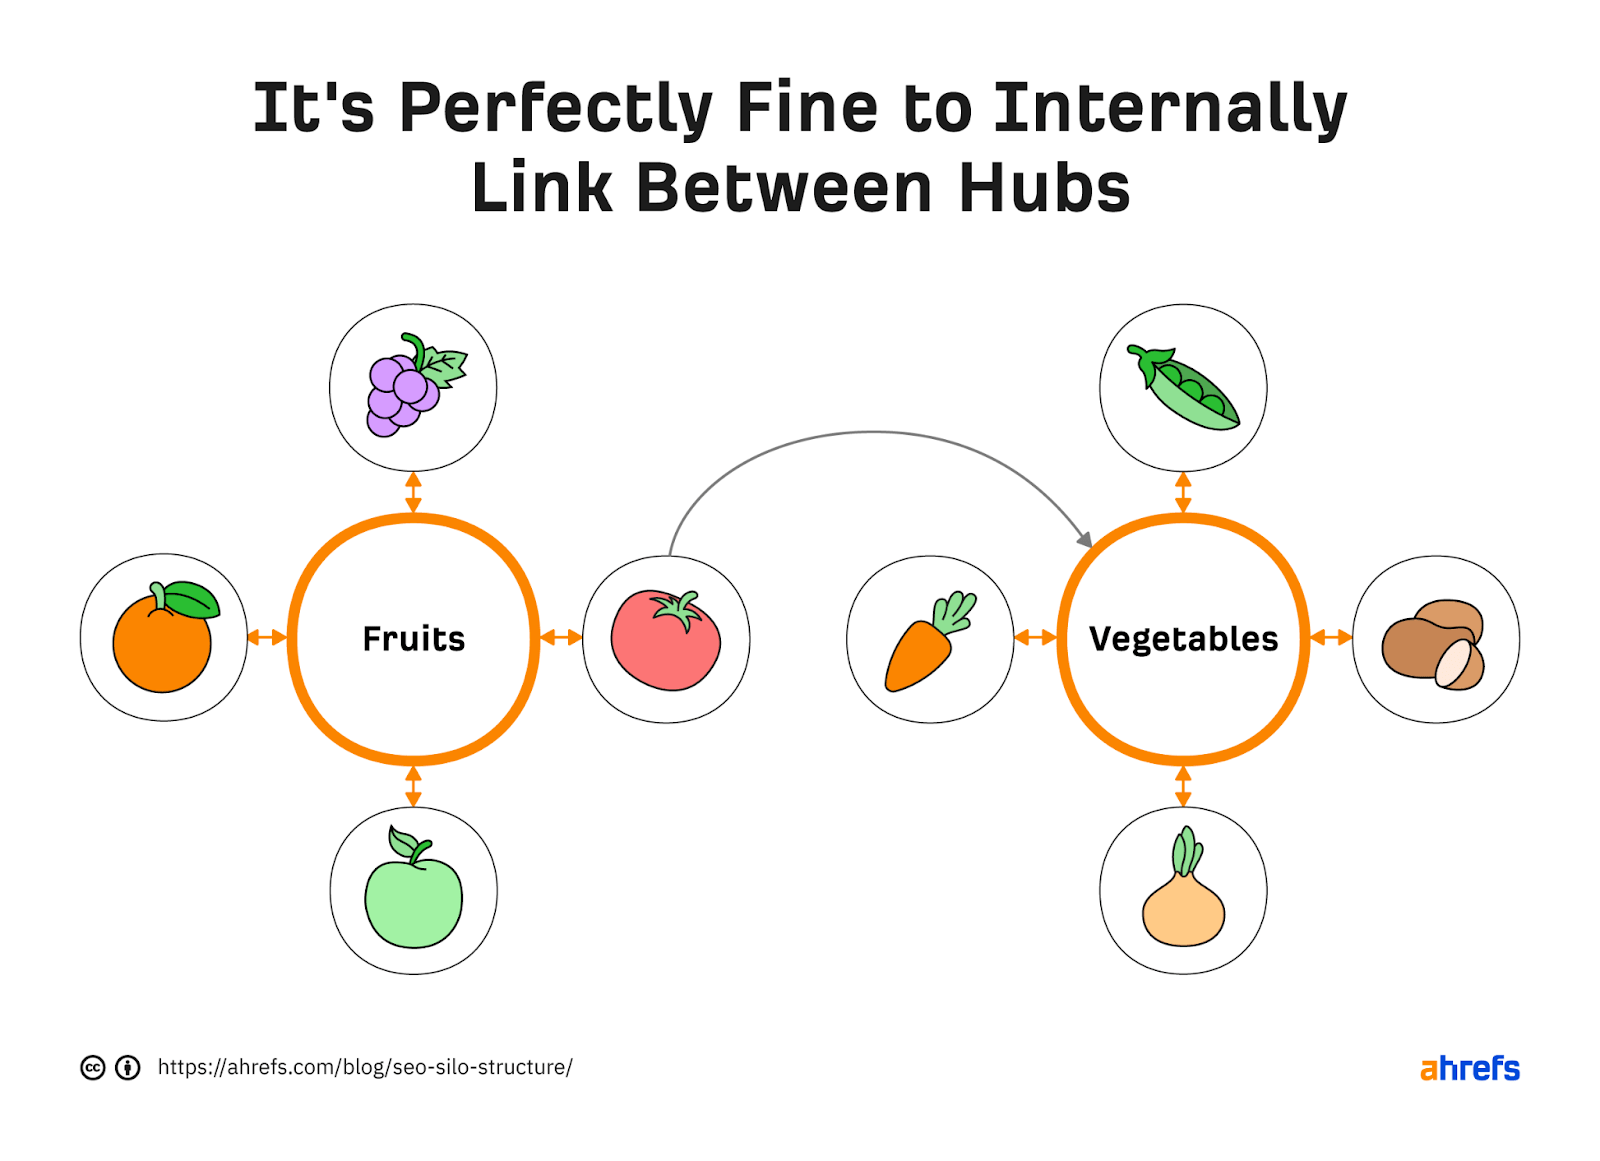 Flowchart showing 2 content hubs "fruits" and "vegetables"; "tomatoes" connected to "fruit" can be internally linked/connected to "vegetable" hub